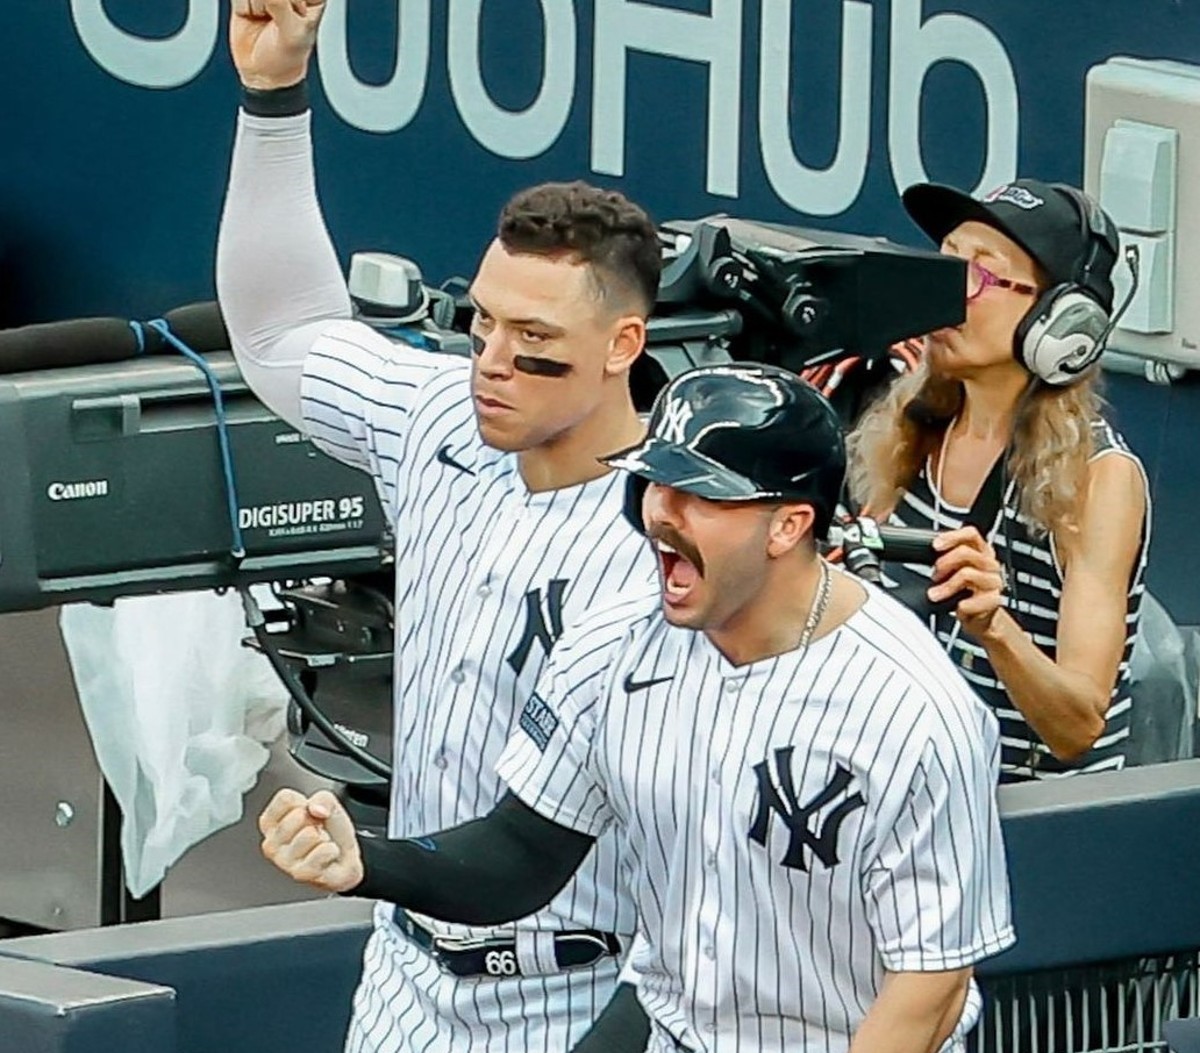 New York Yankees: Expectations high for Aaron Judge in the second half